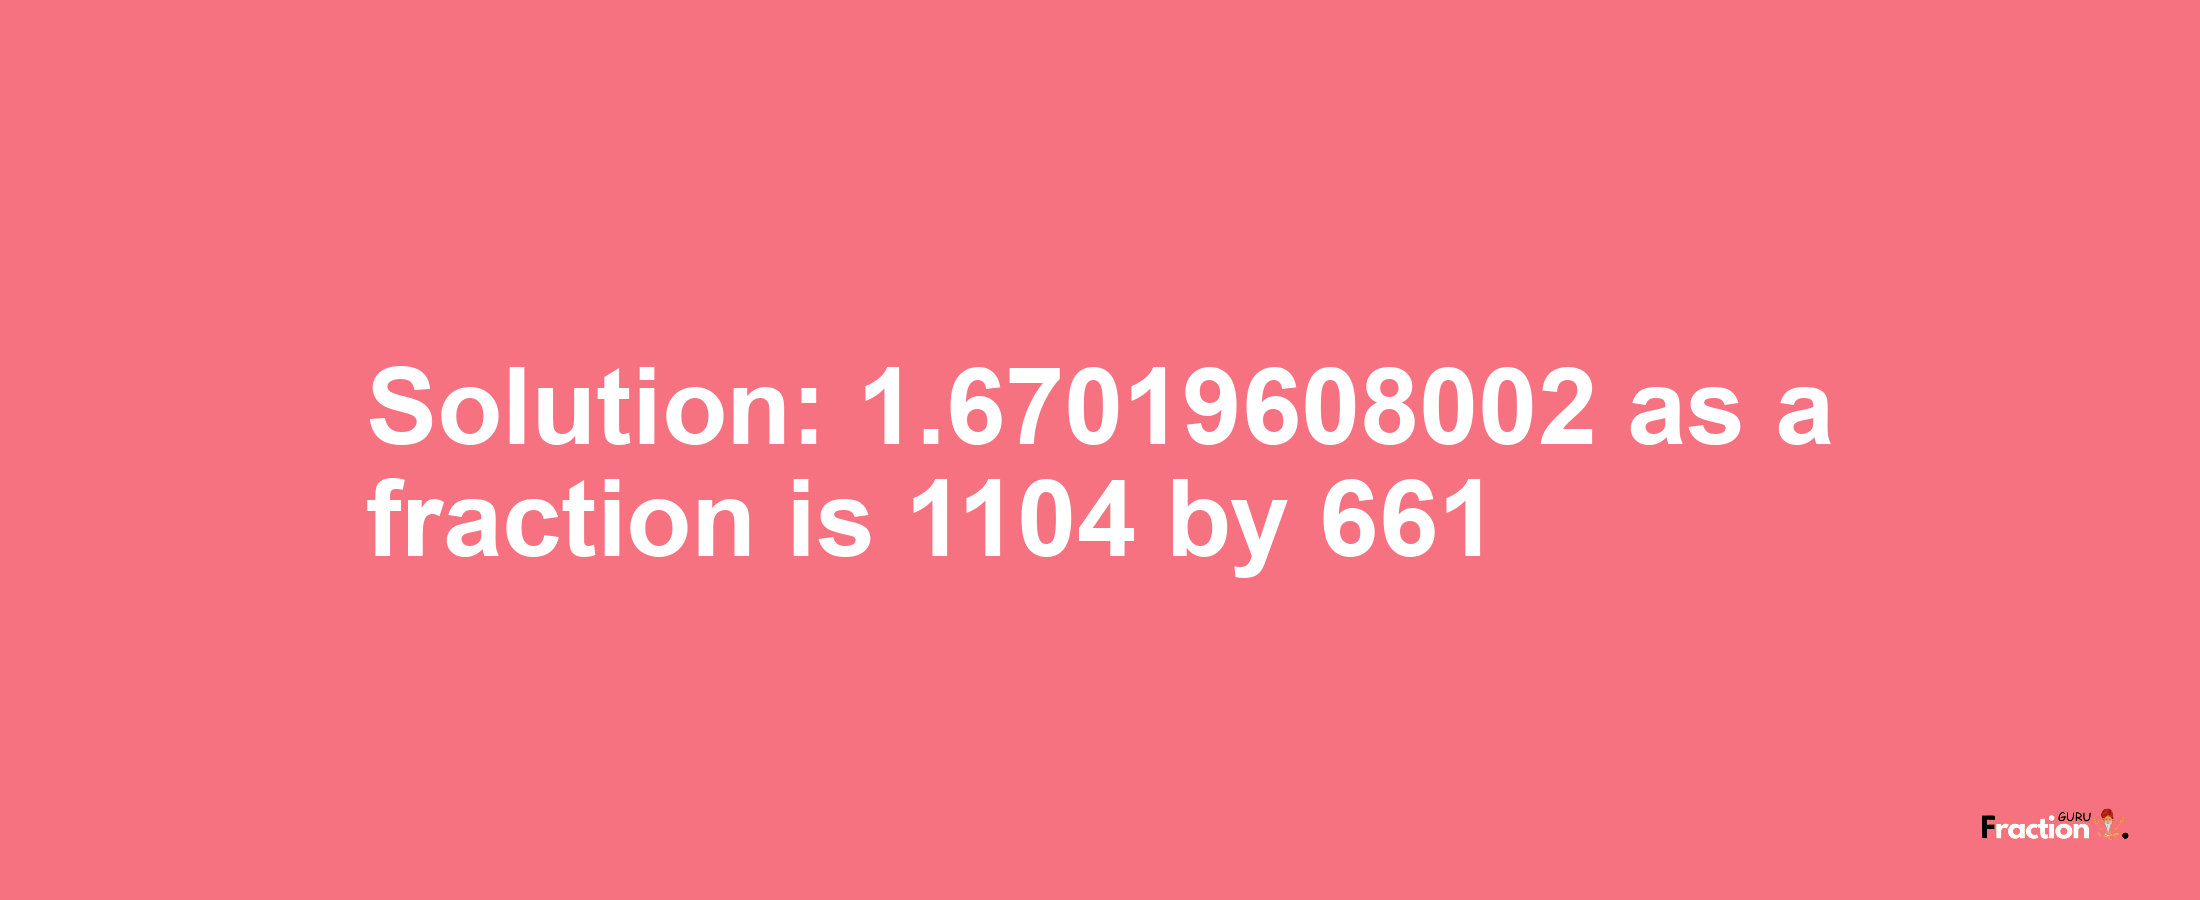 Solution:1.67019608002 as a fraction is 1104/661